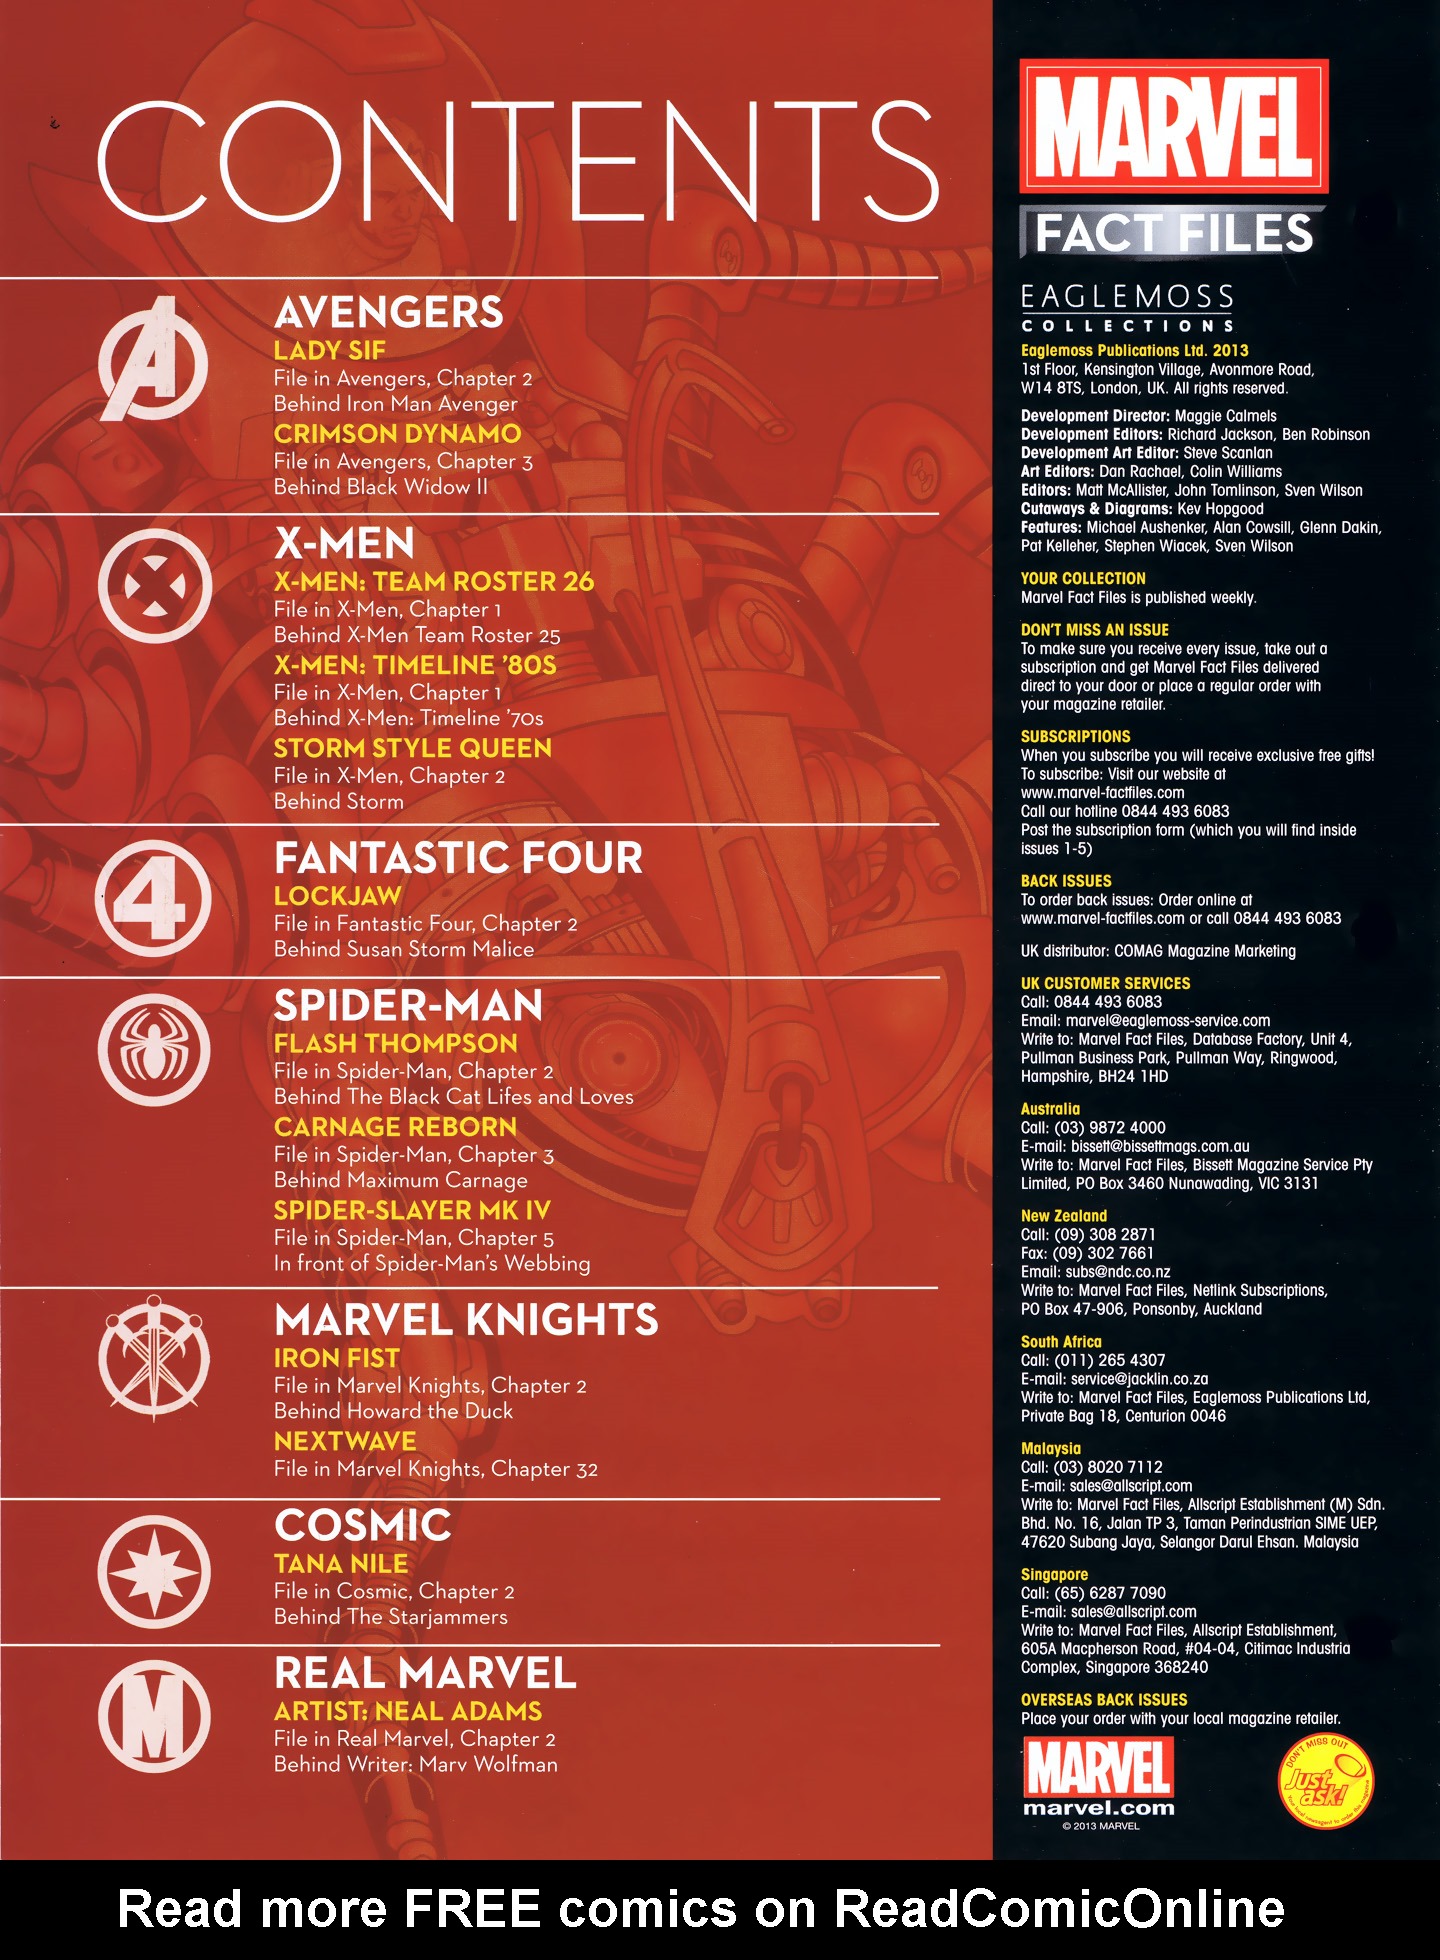 Read online Marvel Fact Files comic -  Issue #26 - 3